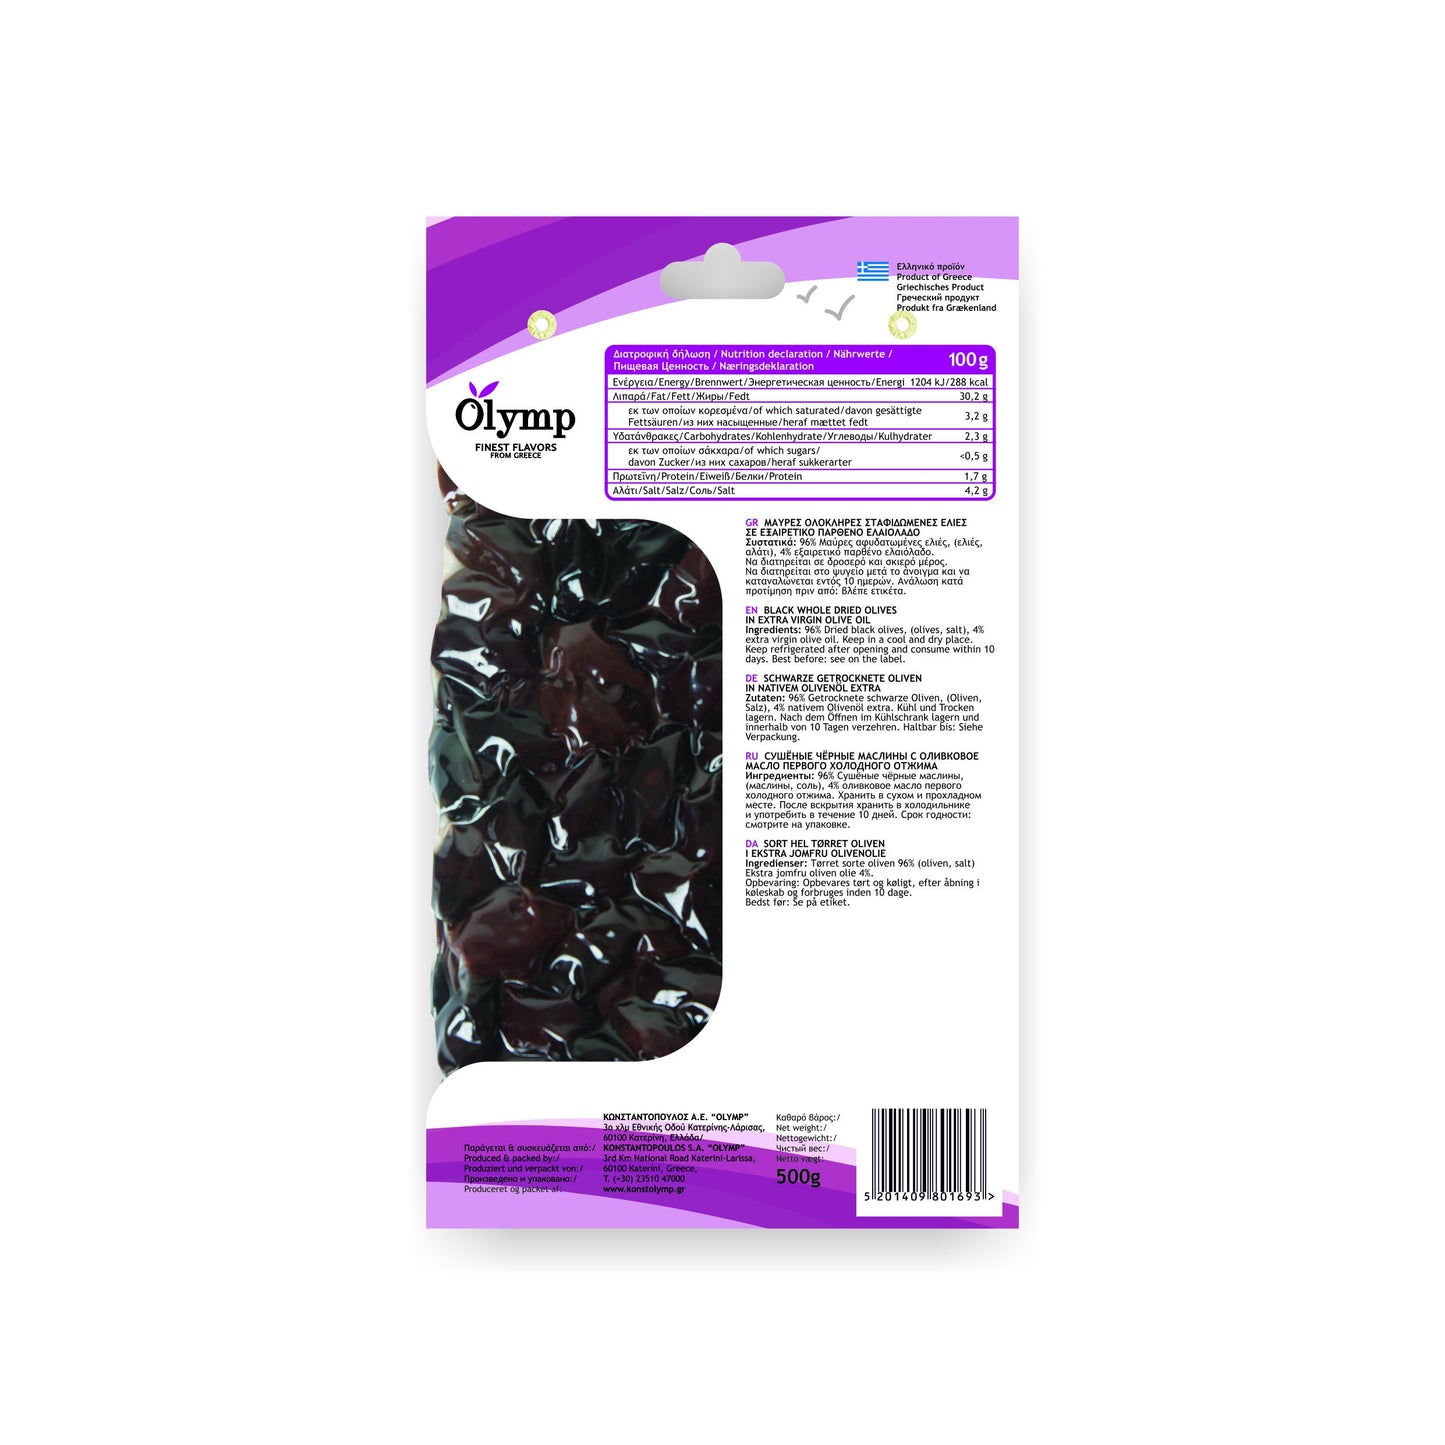 Greek Olives Vacuum bag Superior Quality Handpicked Olives from Chalkidiki Kalamata & Amfissa w/ Extra Virgin Olive Oil spices and herbs TheHolyArt